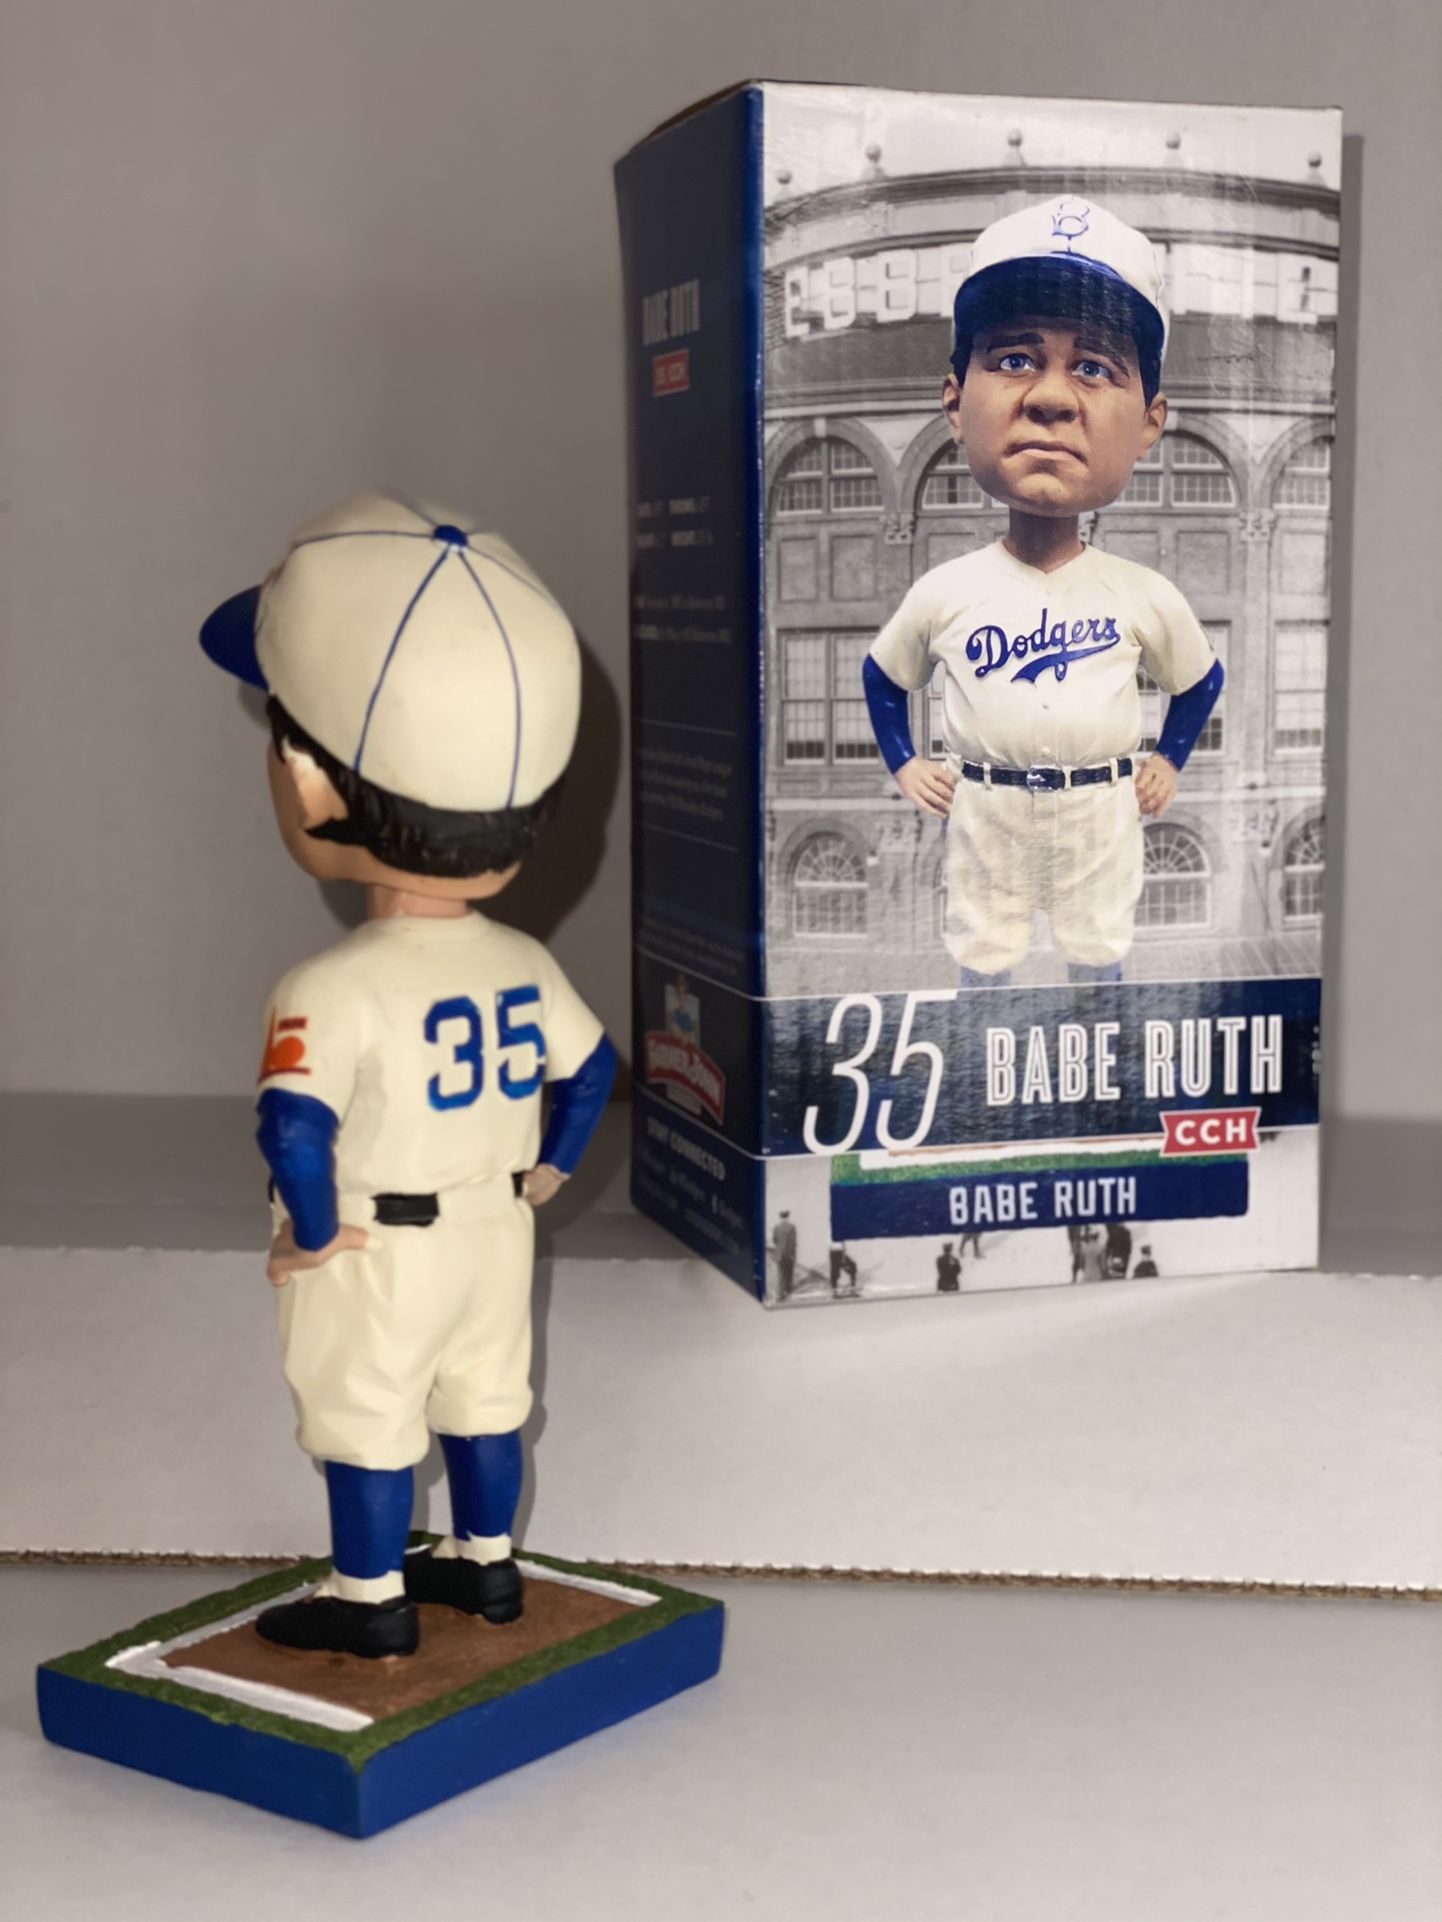 Babe Ruth bobble head for Sale in Santa Ana, CA - OfferUp